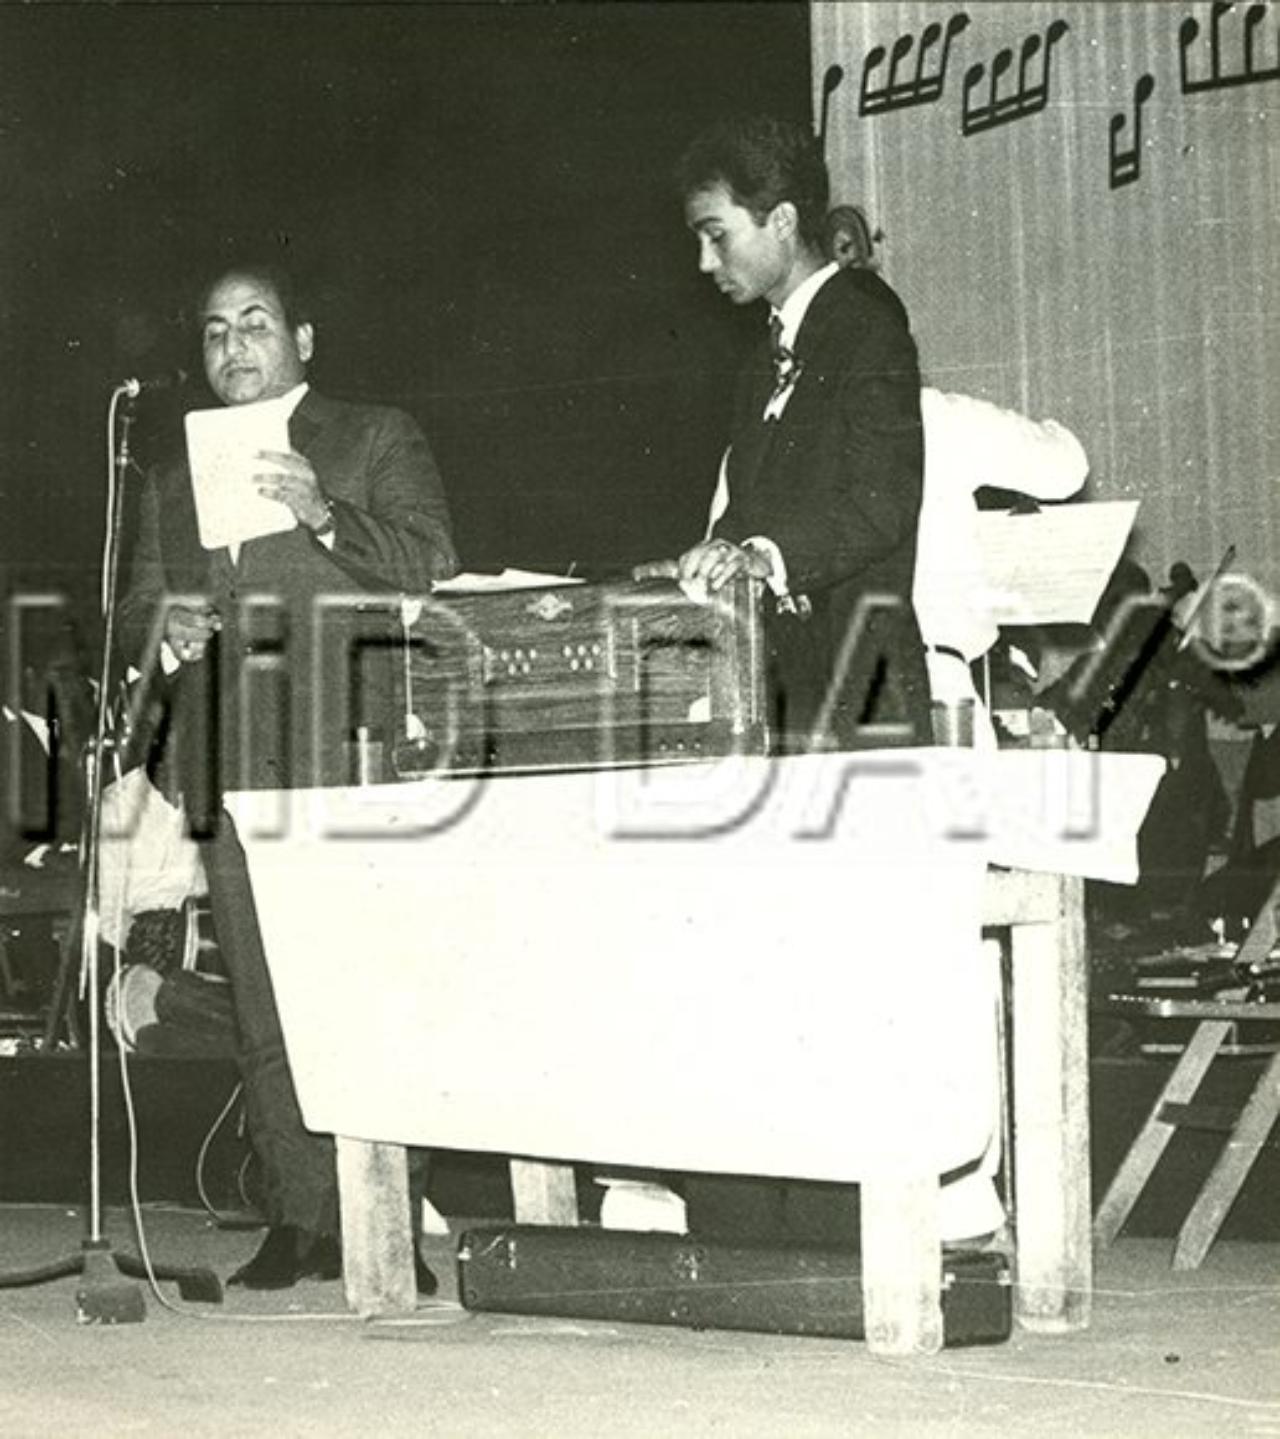 Singh's career started as a casual artist for All India Radio. He also worked at Doordarshan Center, New Delhi and would also play the guitar. It was in the year 1962 that music director Madan Mohan heard Singh at a dinner hosted by Satish Bhatia and called him to Bombay. Singh got the opportunity to sing the song 'Hoke Majboor Mujhe Usne Bulaya Hoga' alongside Mohammed Rafi, Talat Mahmood and Manna Dey in Chetan Anand's 'Haqeeqat'. He was given a solo by Khayyam in film Aakhri Khat. He has sung a few popular duets with Kishore Kumar and Mohammed Rafi